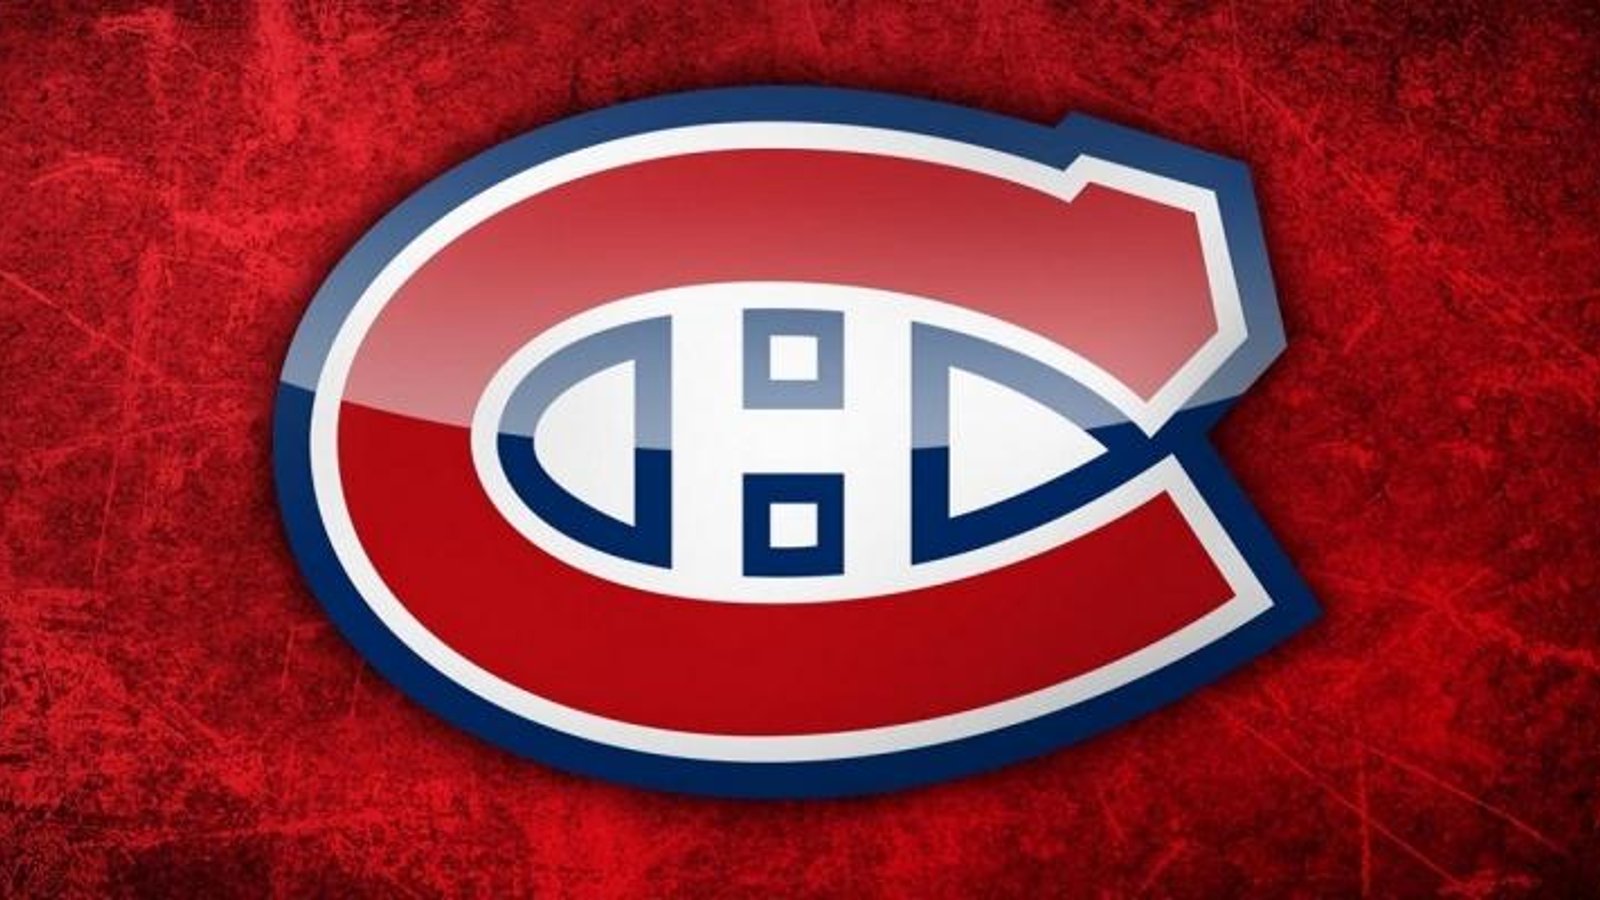 Report: Canadiens reveal they have a major announcement coming very soon.